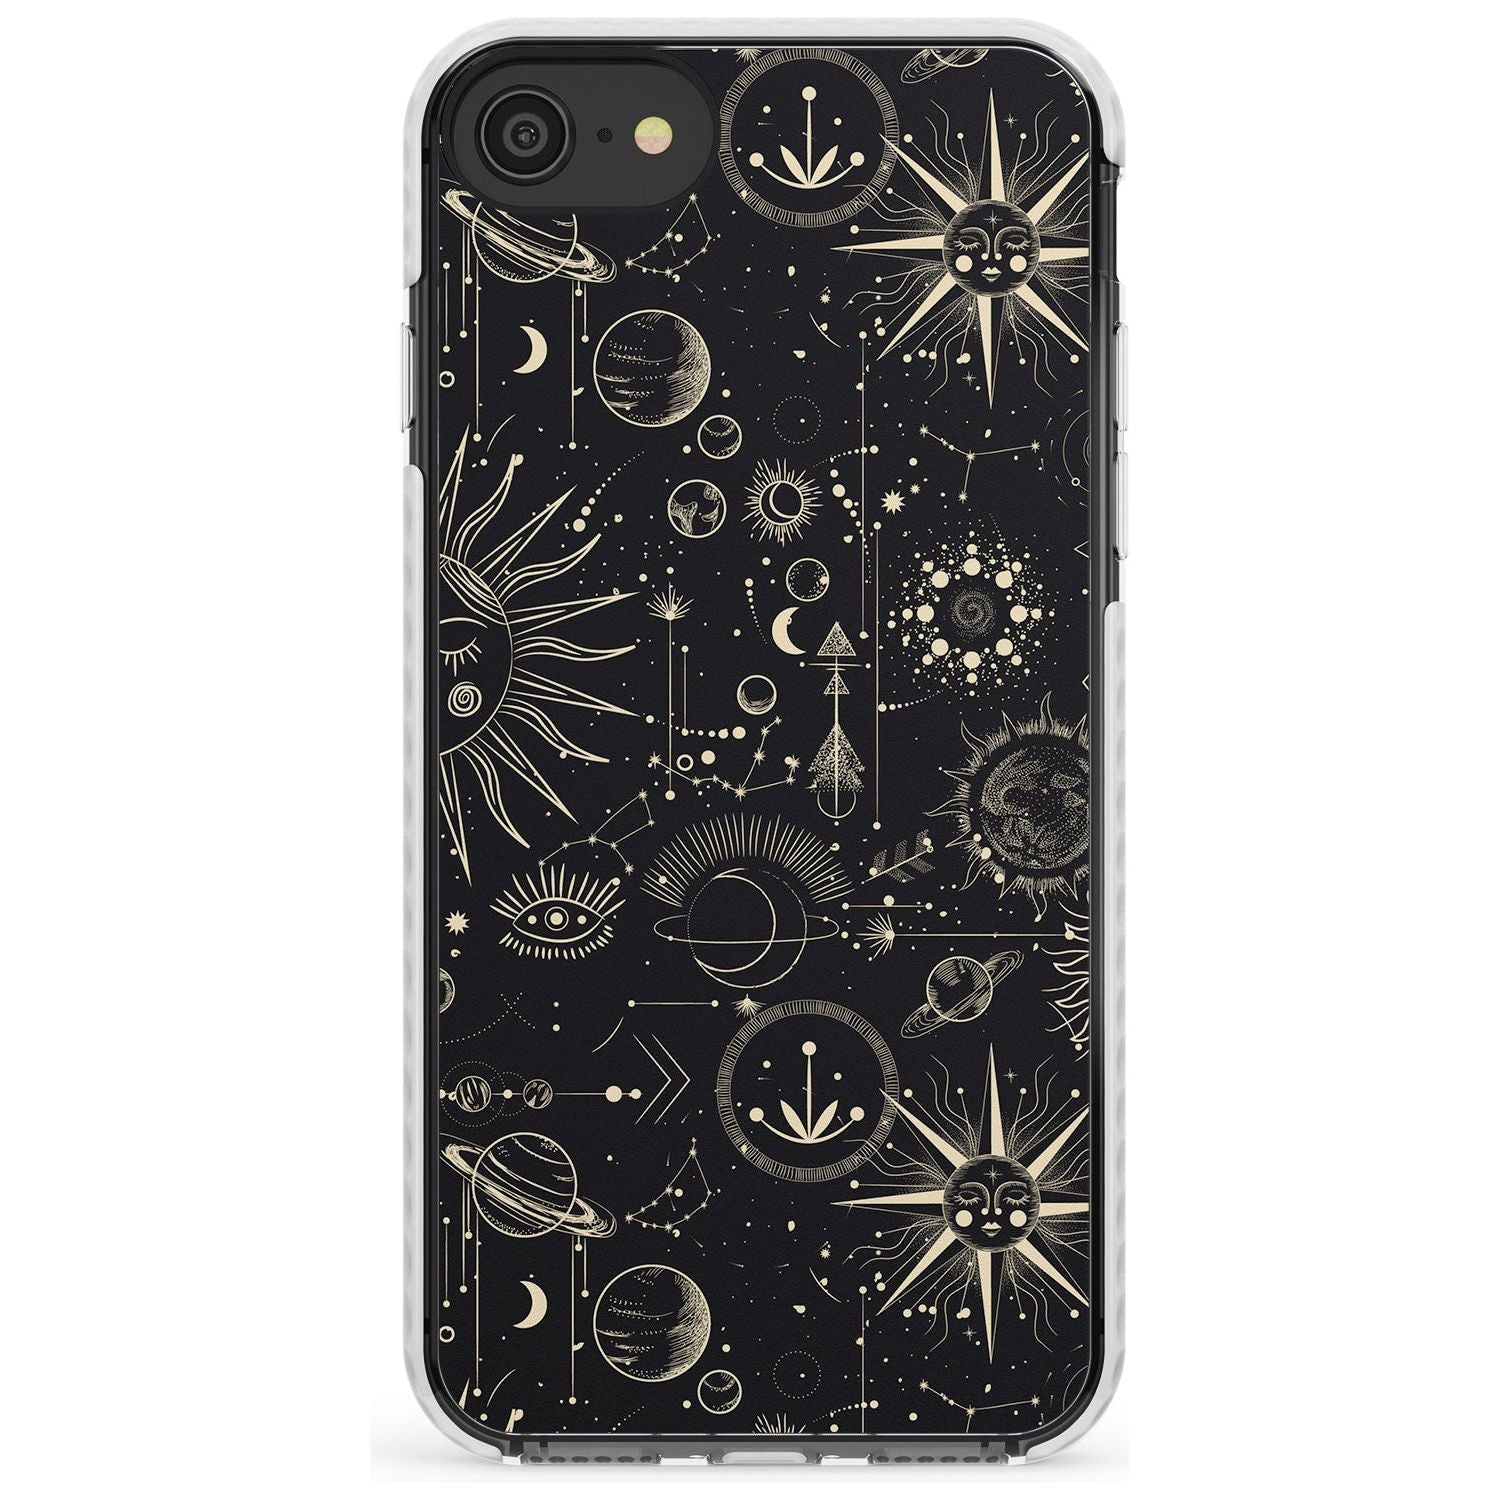 Suns & Planets Slim TPU Phone Case for iPhone SE 8 7 Plus